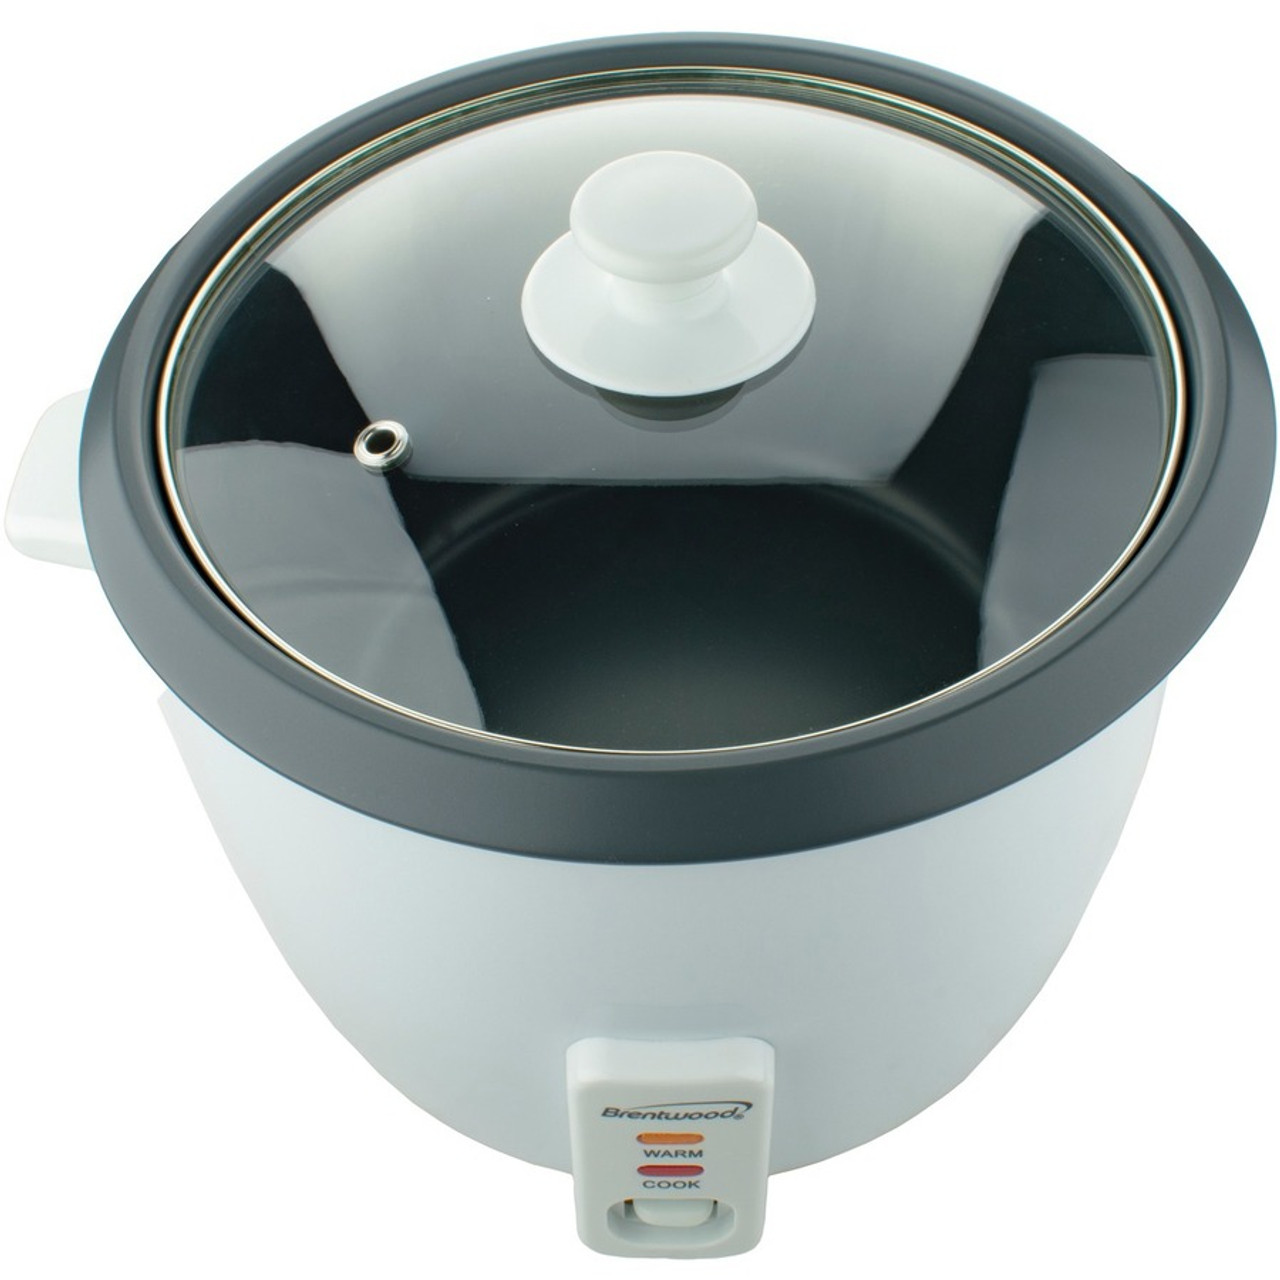 Brentwood Ts-380s - 10-Cup Rice Cooker with Steamer